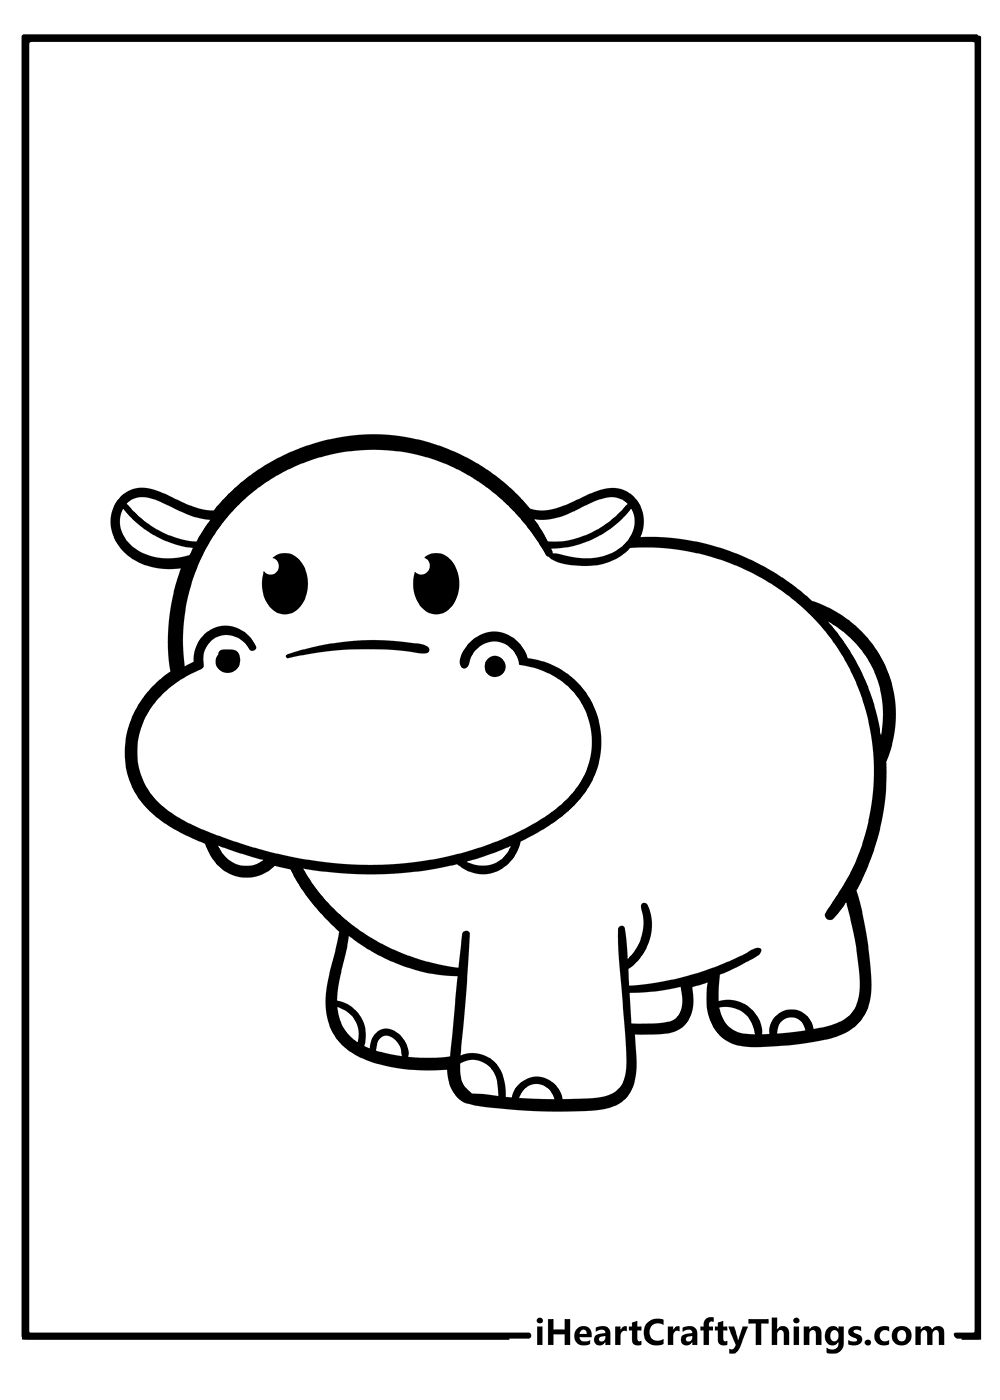 Hippo Coloring Original Sheet for children free download